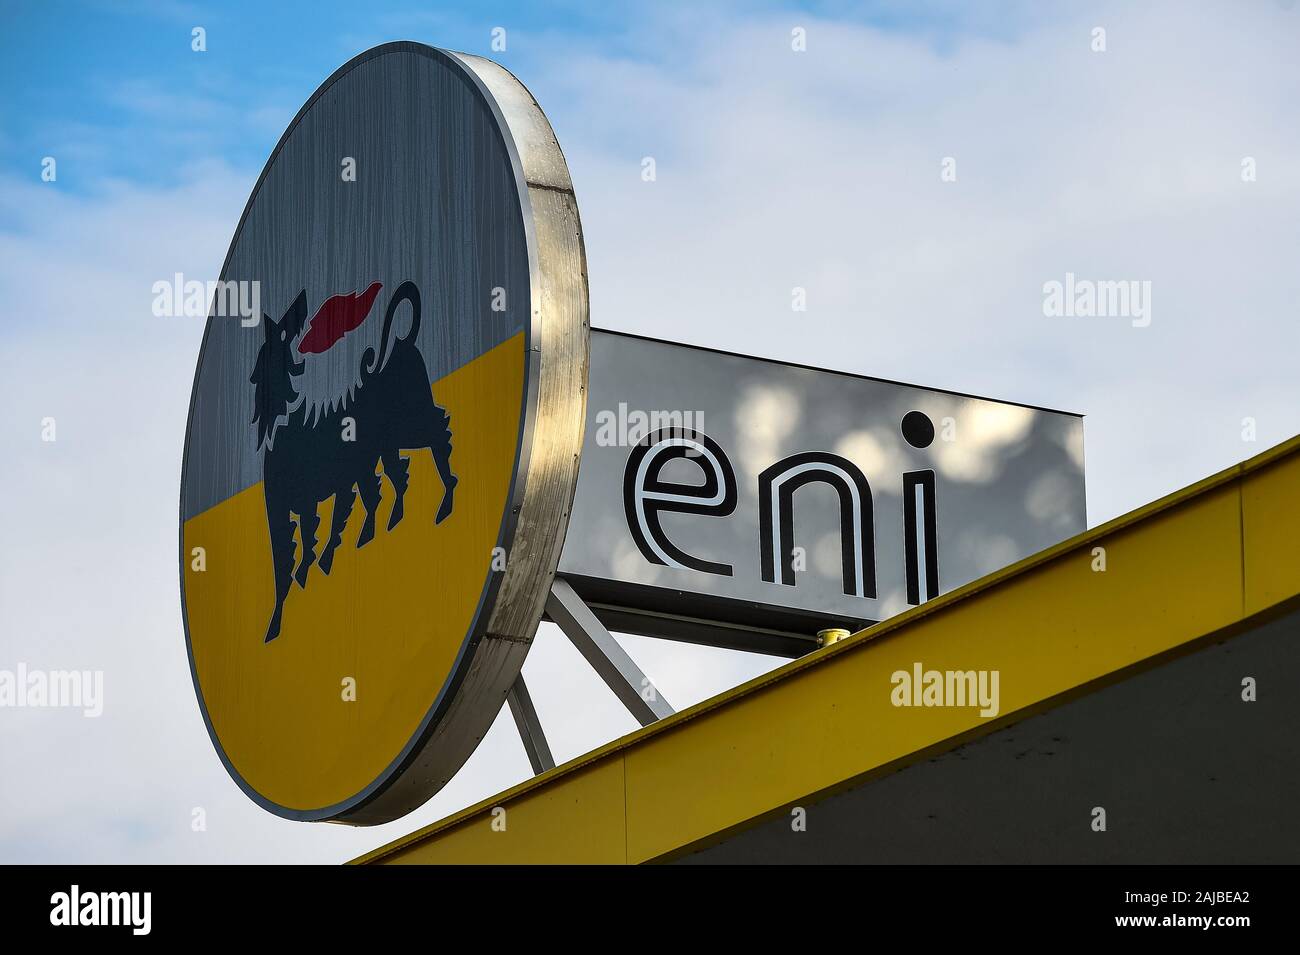 Turin, Italy - 06 November, 2019: The sign for Eni (Ente Nazionale Idrocarburi) is seen at a Eni gasoline station. Italian trade unions called a two-day petrol station strike. The action is due to new measures being brought in by the government, including the introduction of electronic invoicing.(6th and 7th Novembre 2019) petrol station strike. The action is due to new measures being brought in by the government, including the introduction of electronic invoicing. Credit: Nicolò Campo/Alamy Live News Stock Photo